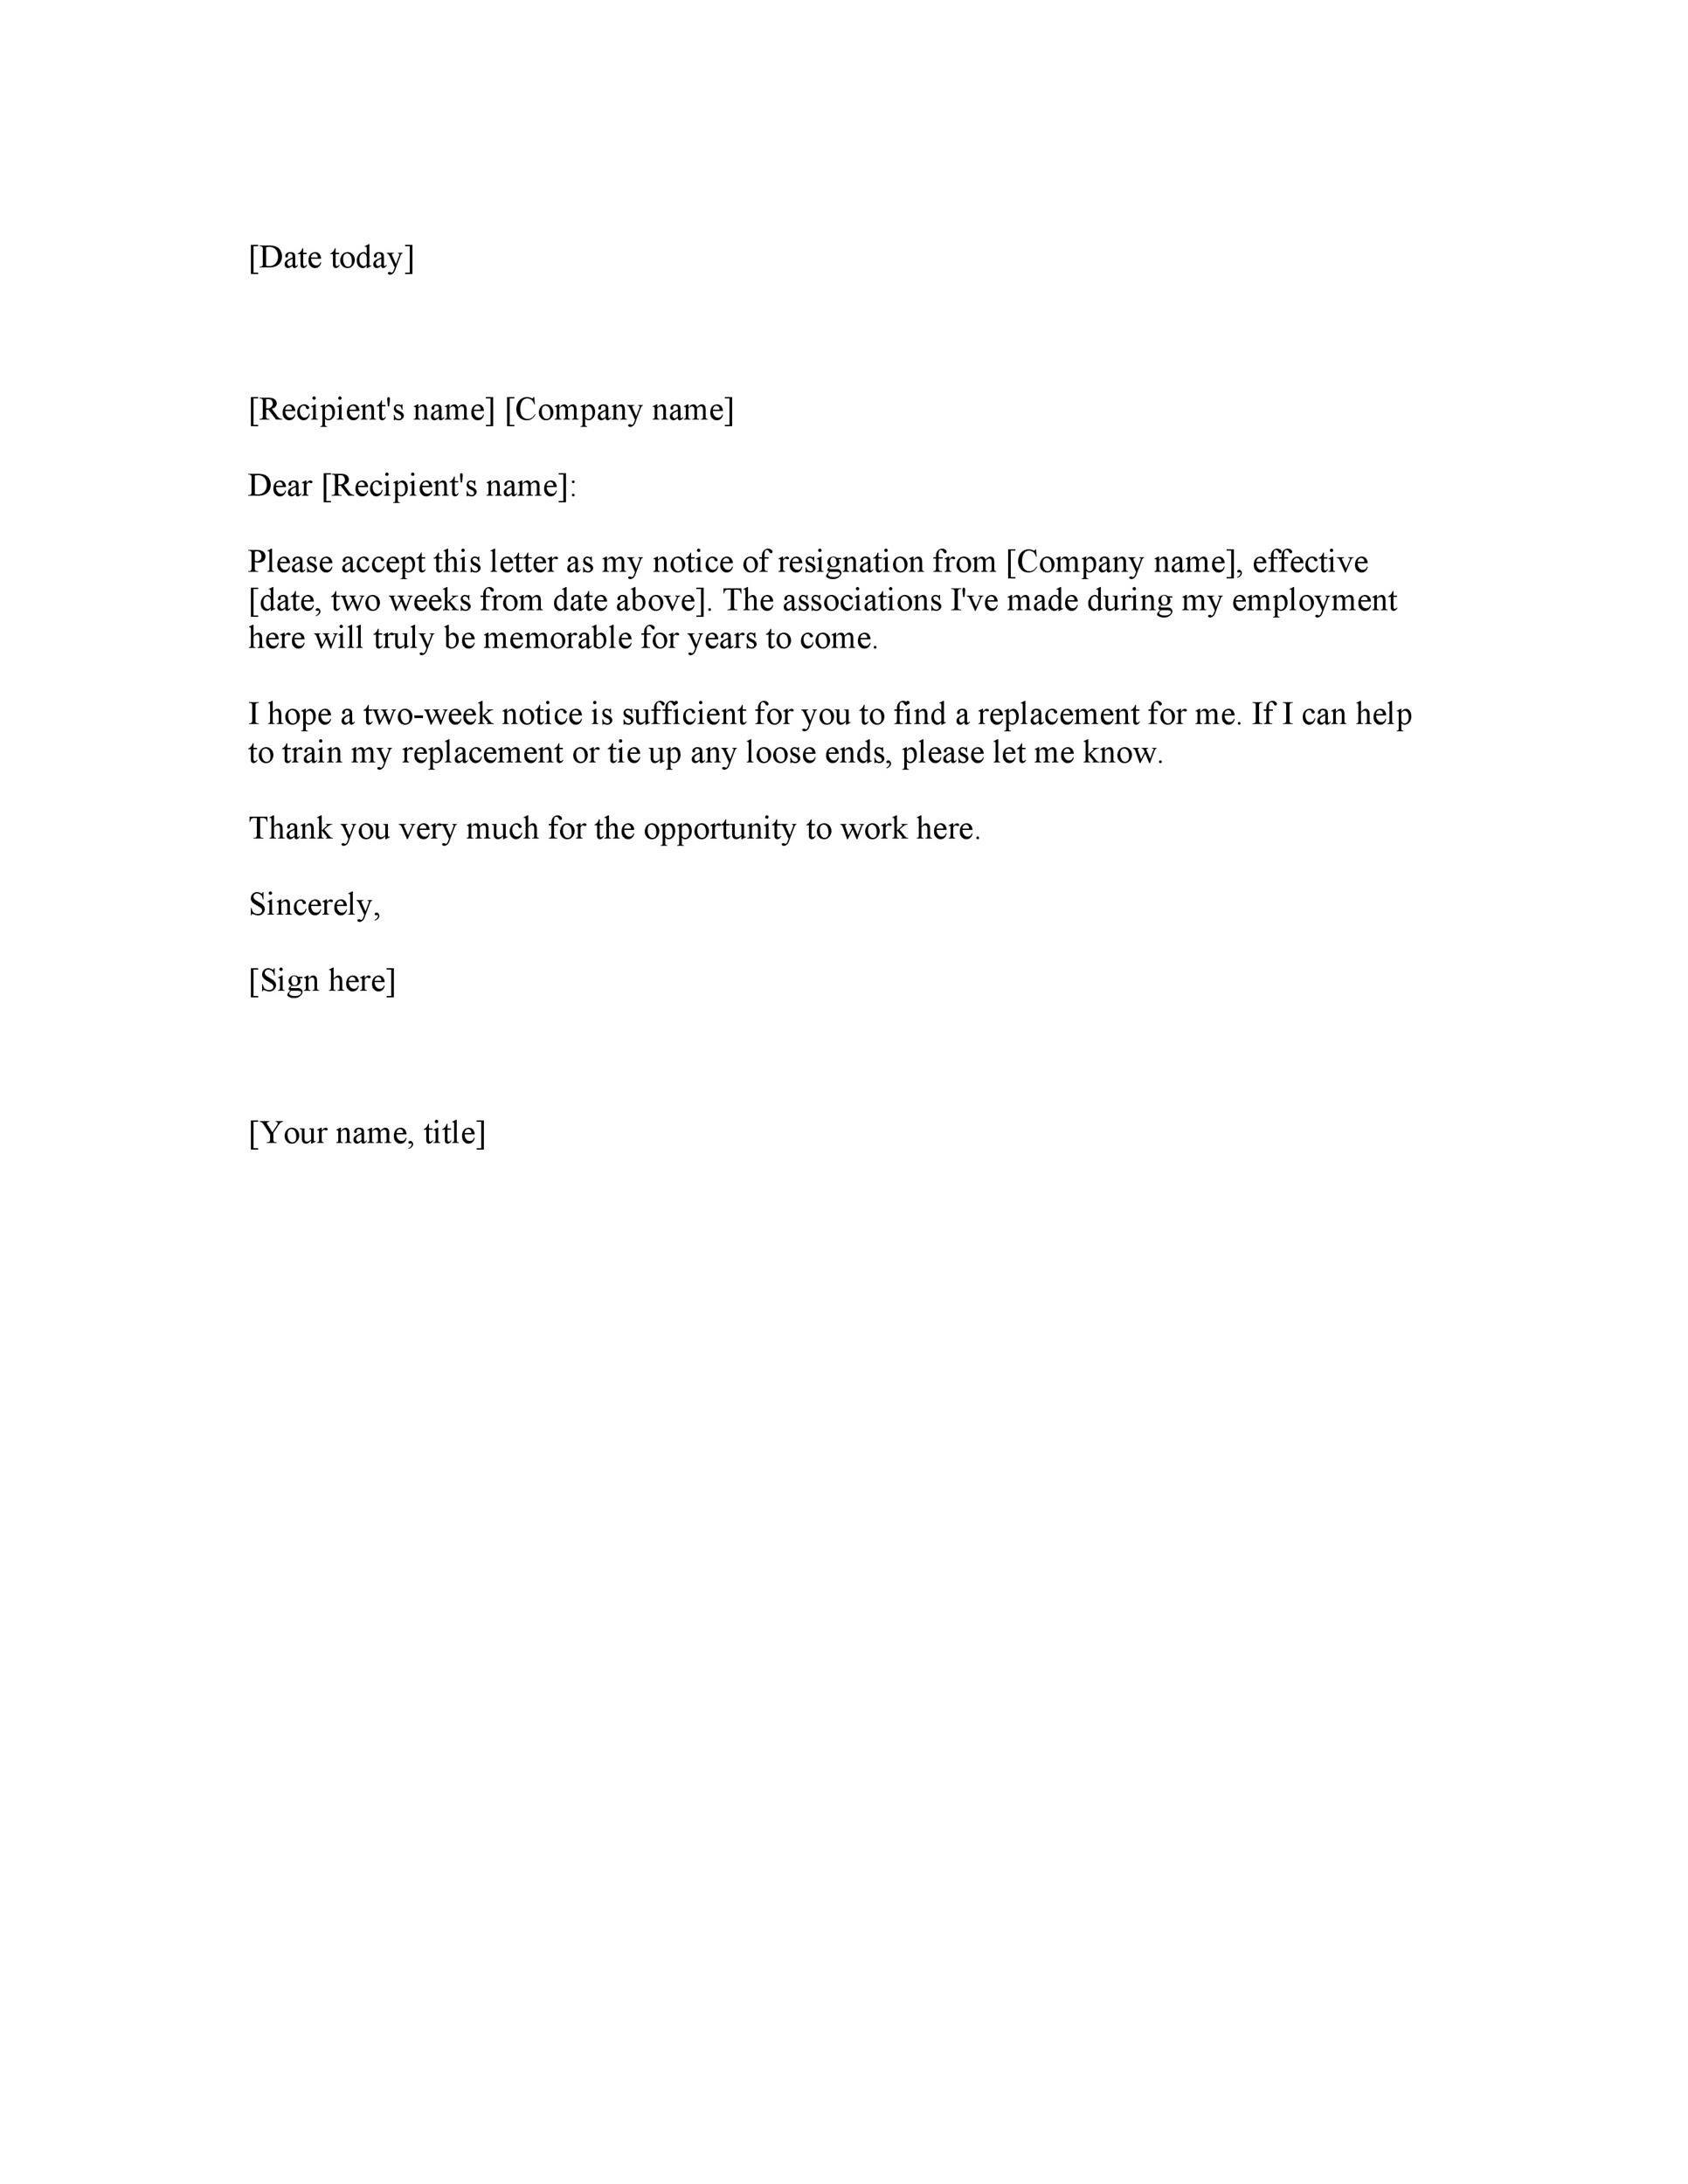 Resignation Letter 2 Weeks Notice Examples from templatelab.com